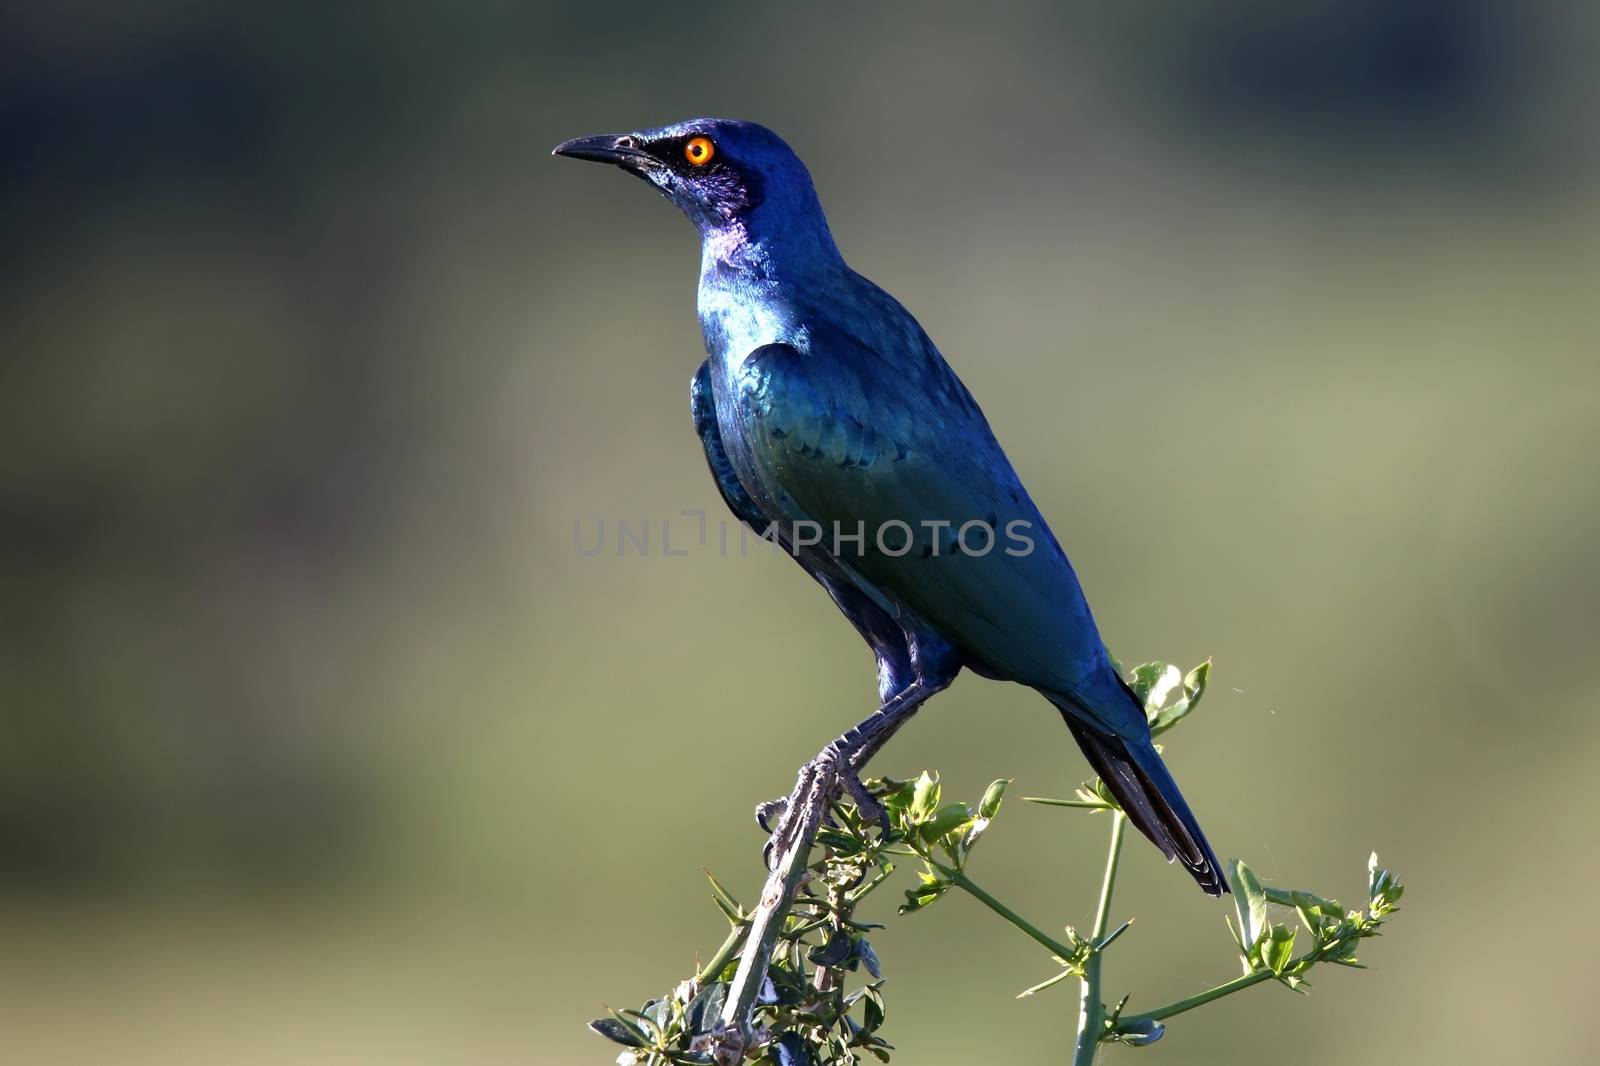 Beautiful glossy starling bird with iridescent feathers and orange eye